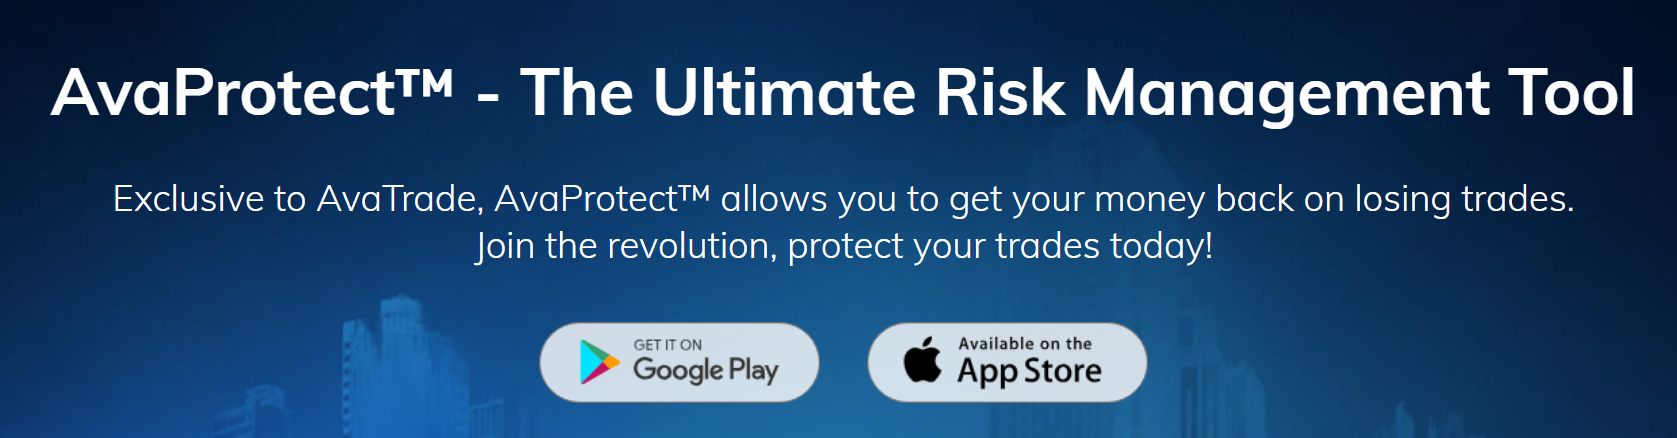 Risk management with AvaProtect